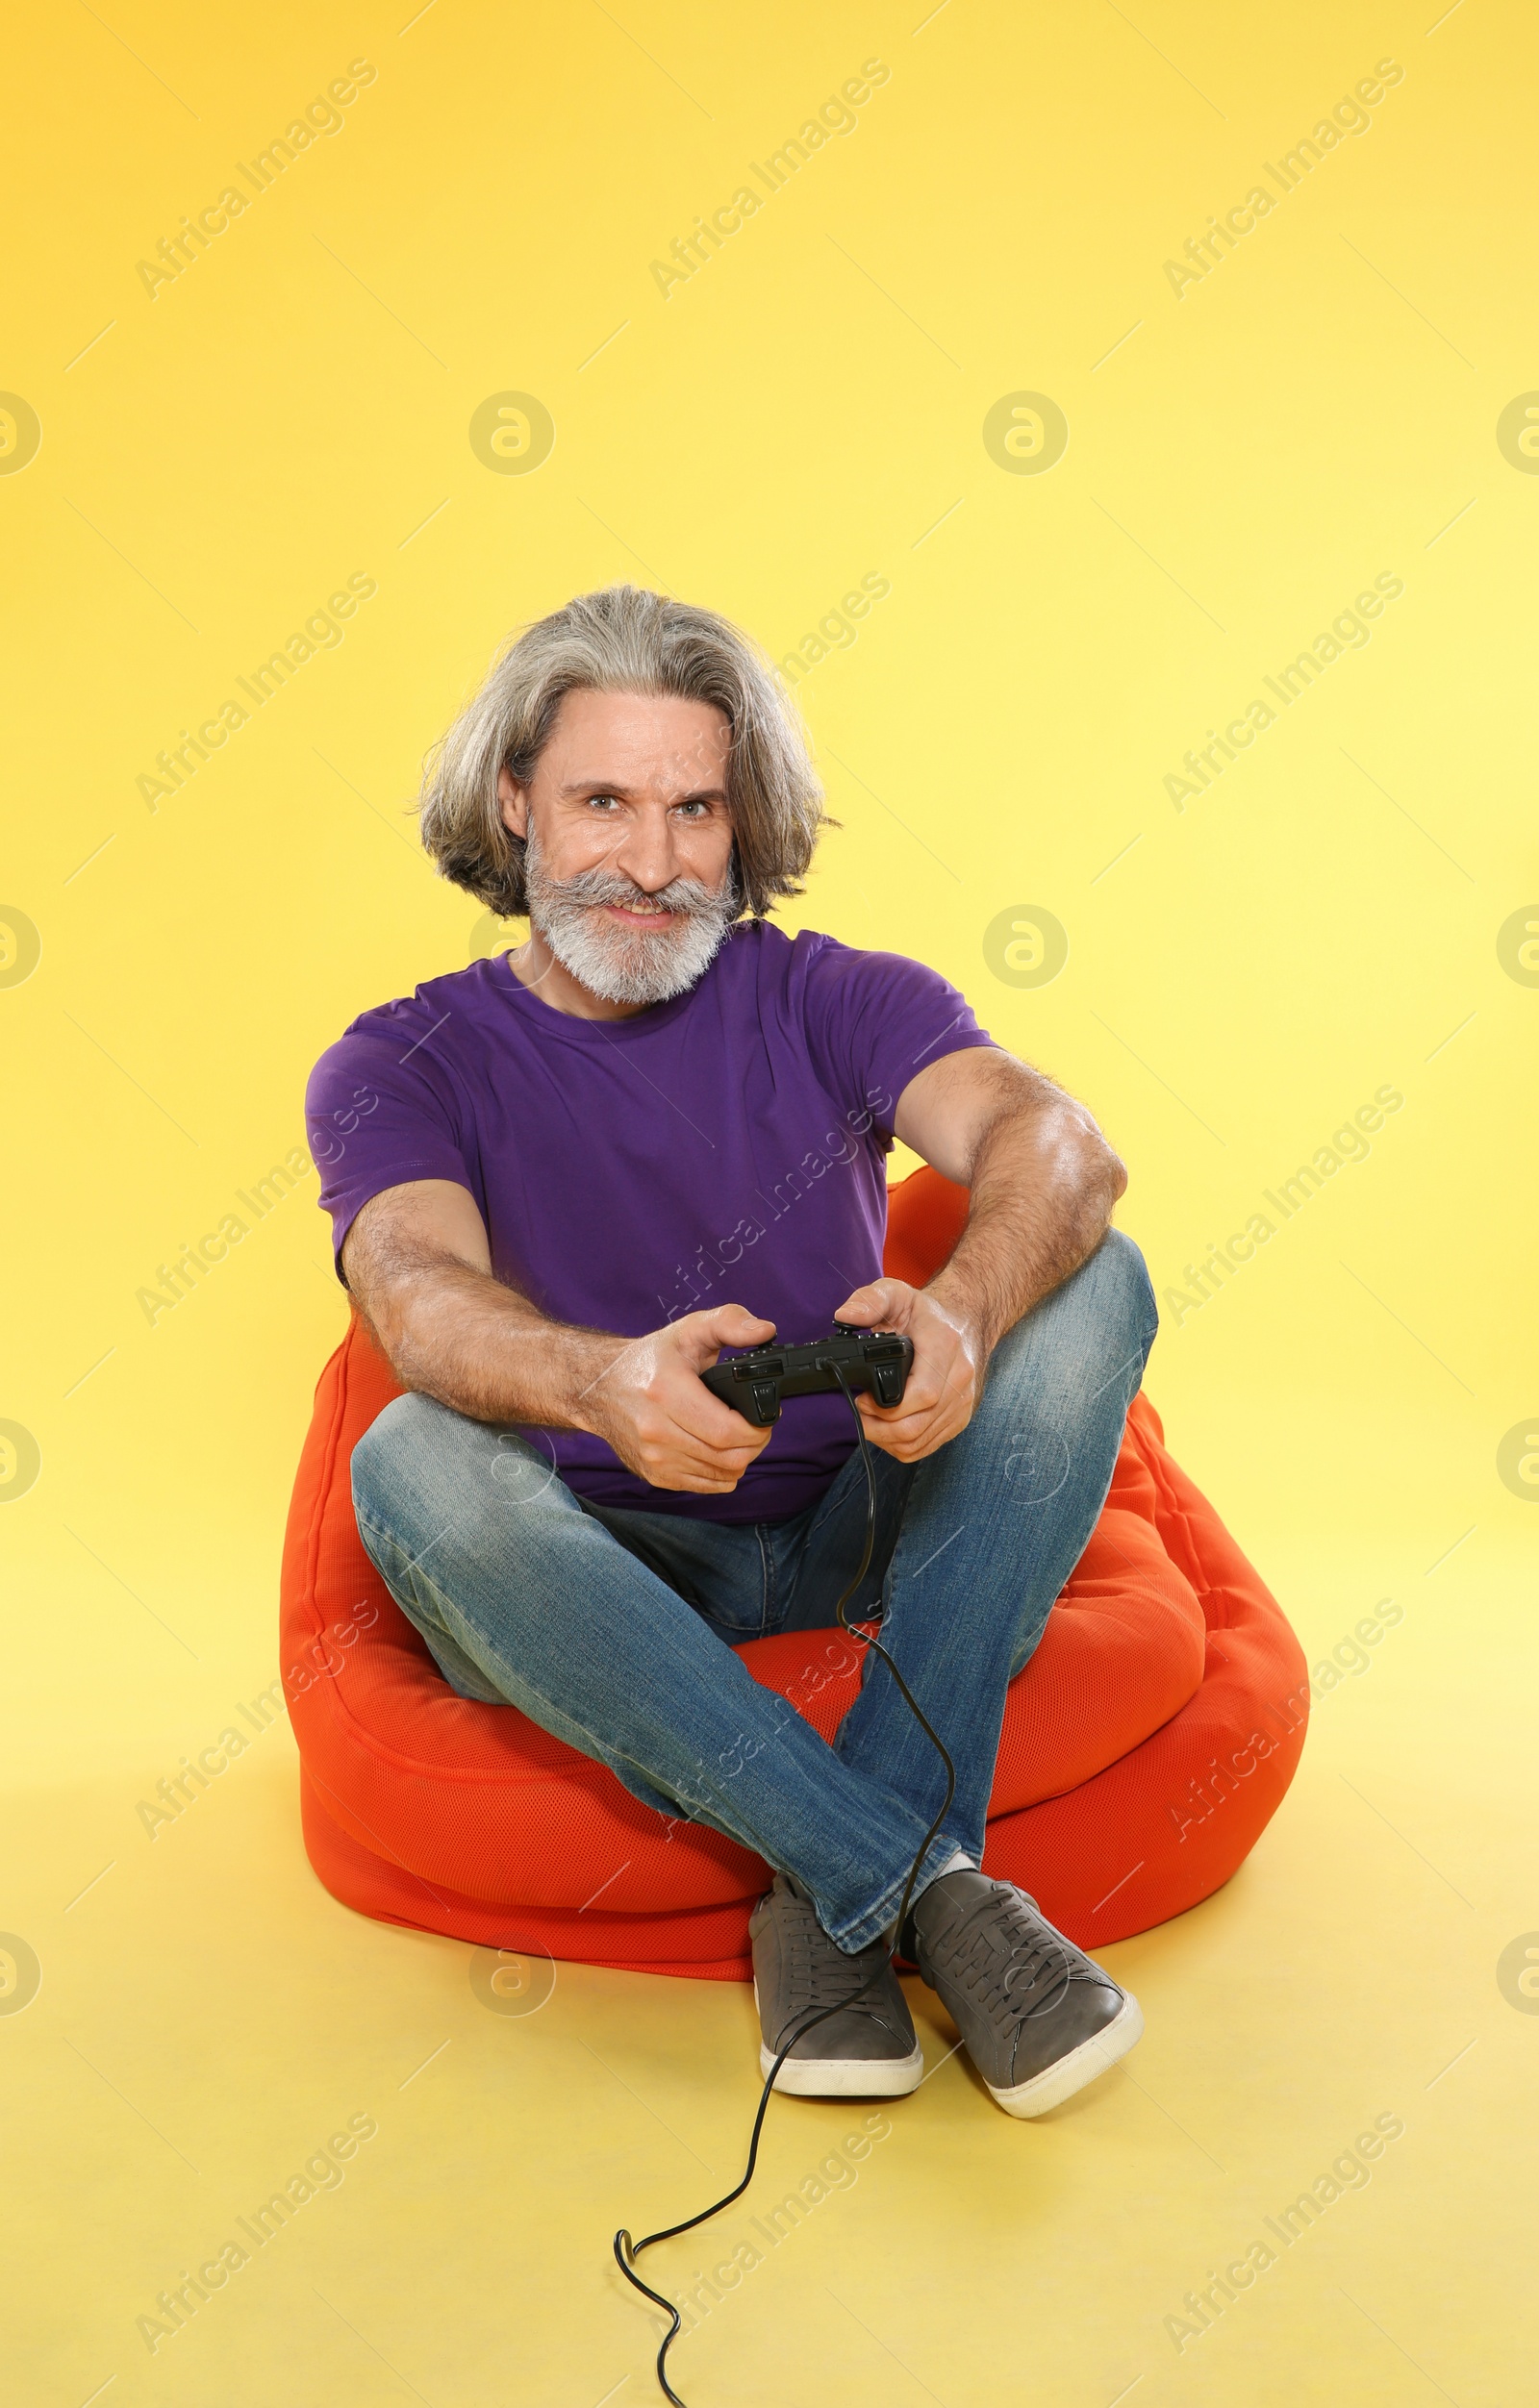 Photo of Emotional mature man playing video games with controller on color background